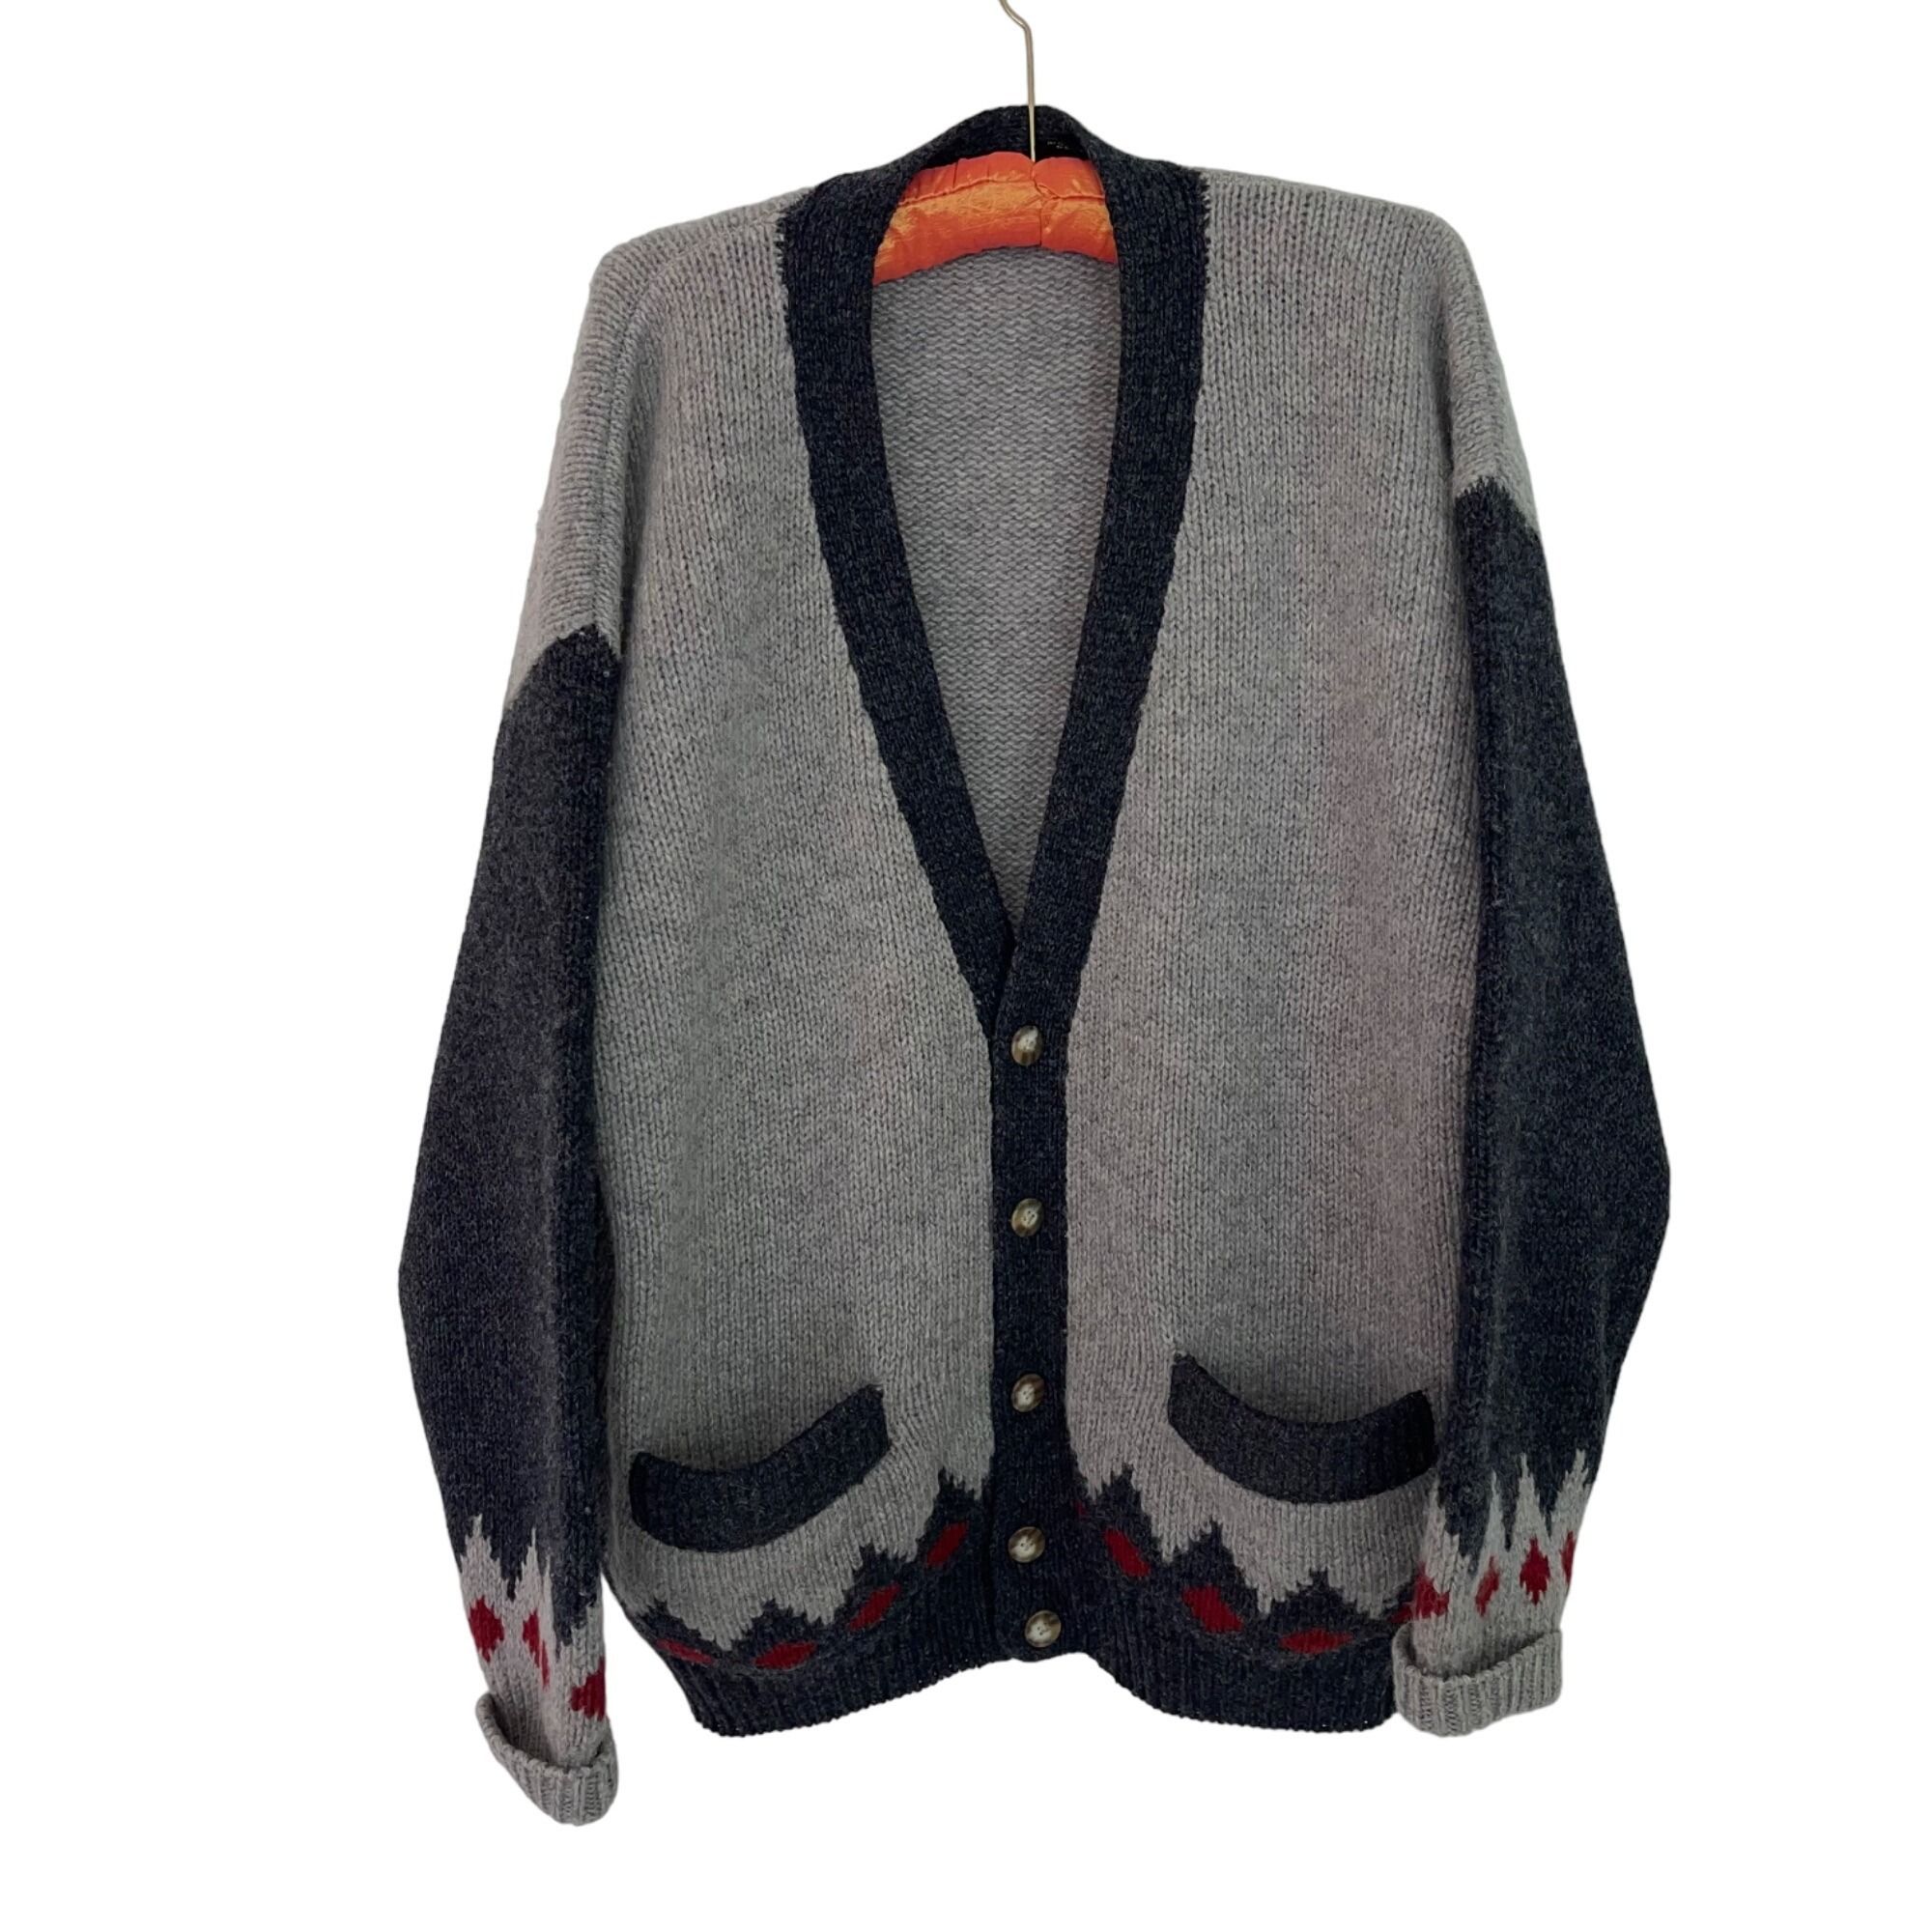 Structure Structure Mens Vintage 90s Cardigan Size Medium Grey Red Size US M / EU 48-50 / 2 - 1 Preview